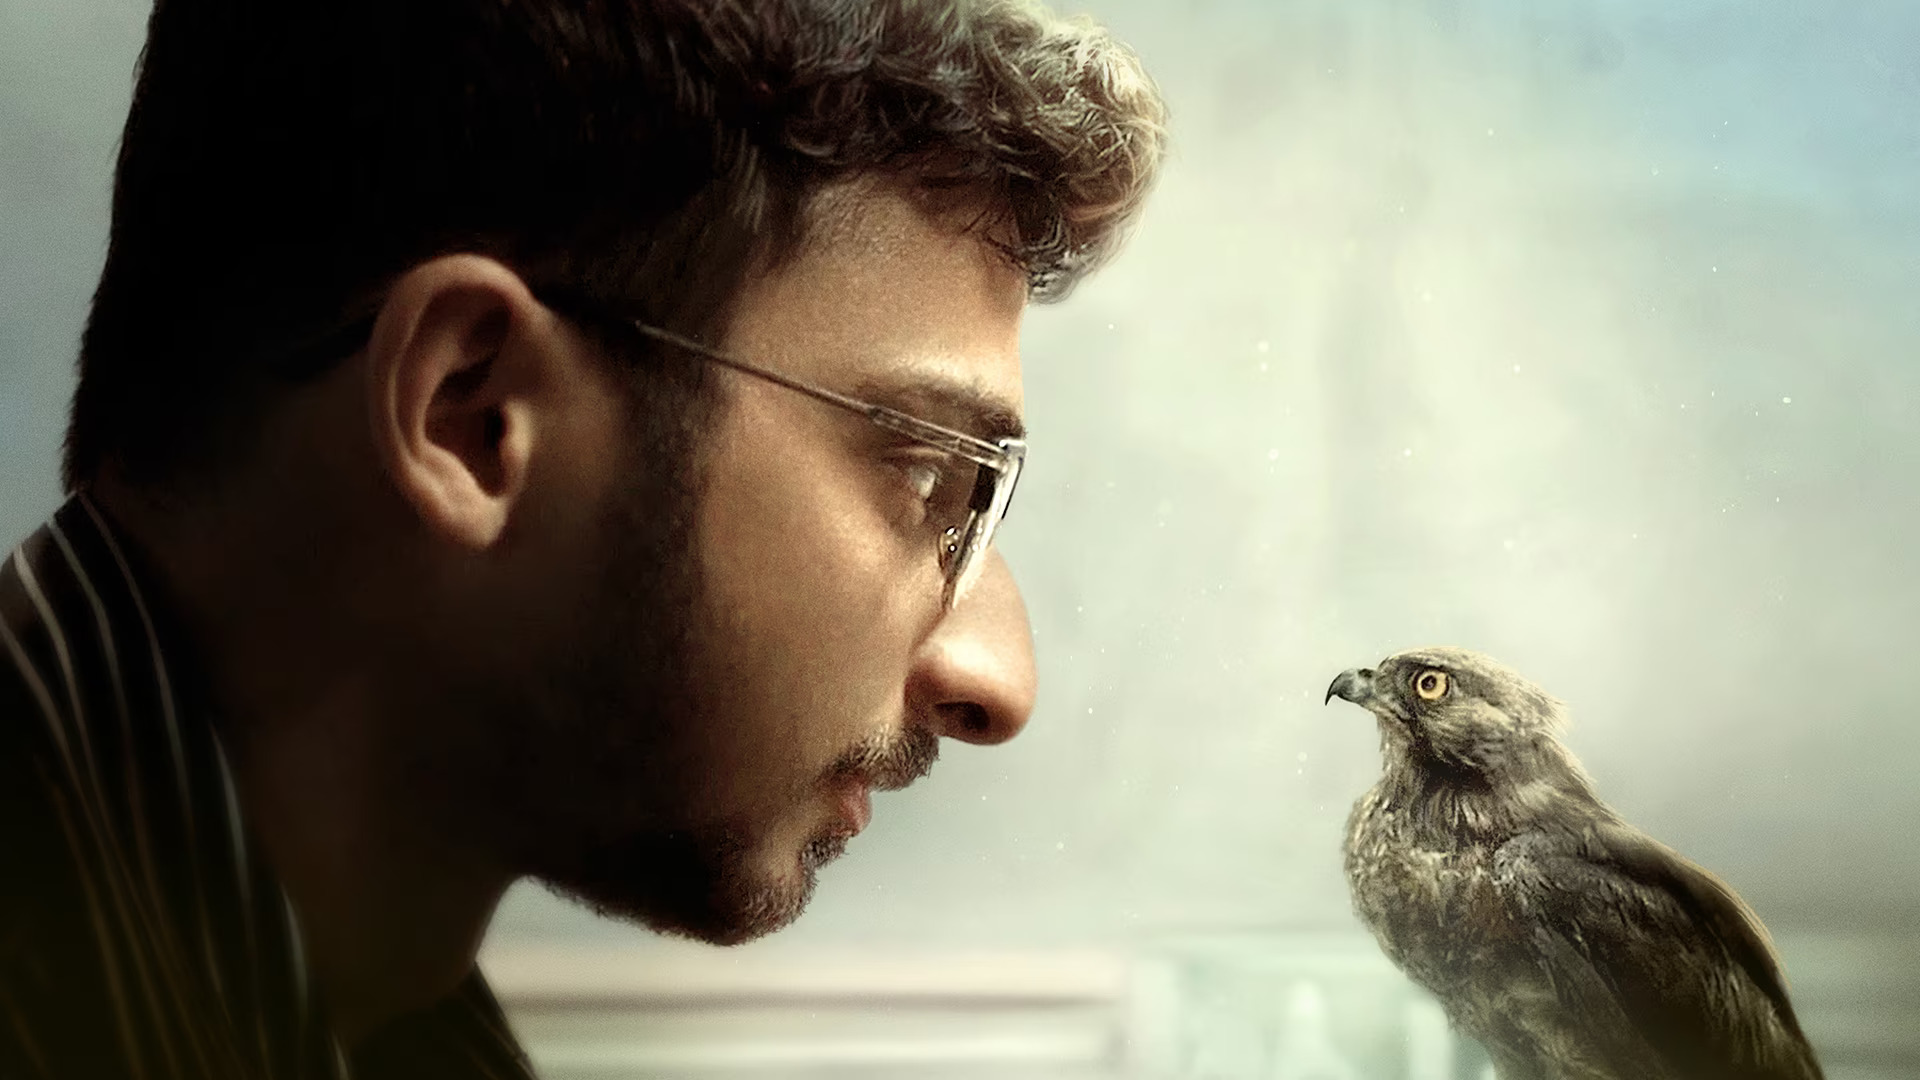 man and bird staring at each other